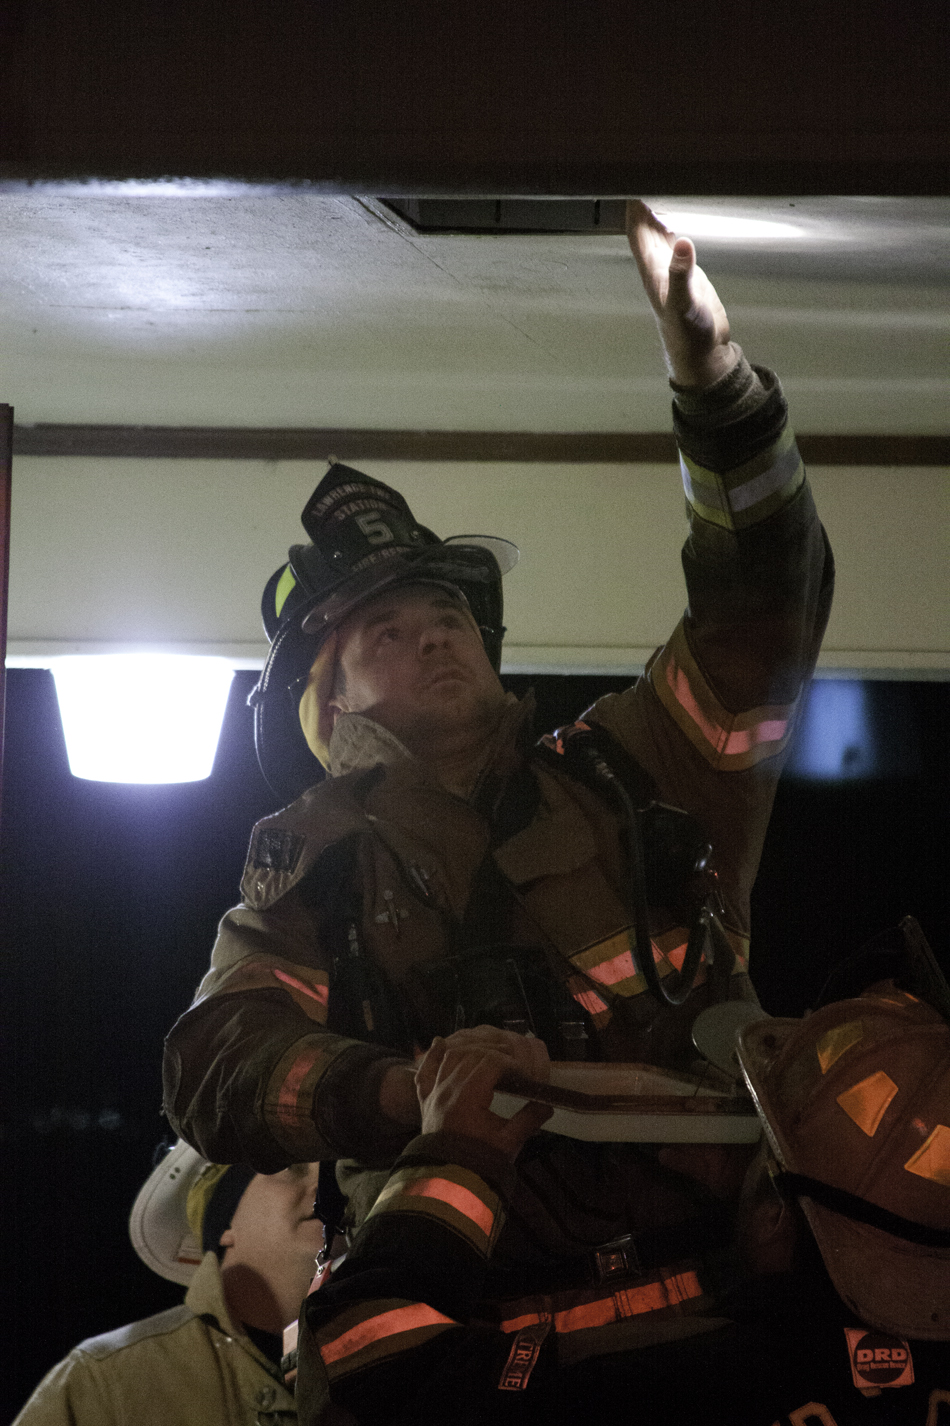 A firefighter pulls out one of the lights to get a closer look at the reported smoke smell.